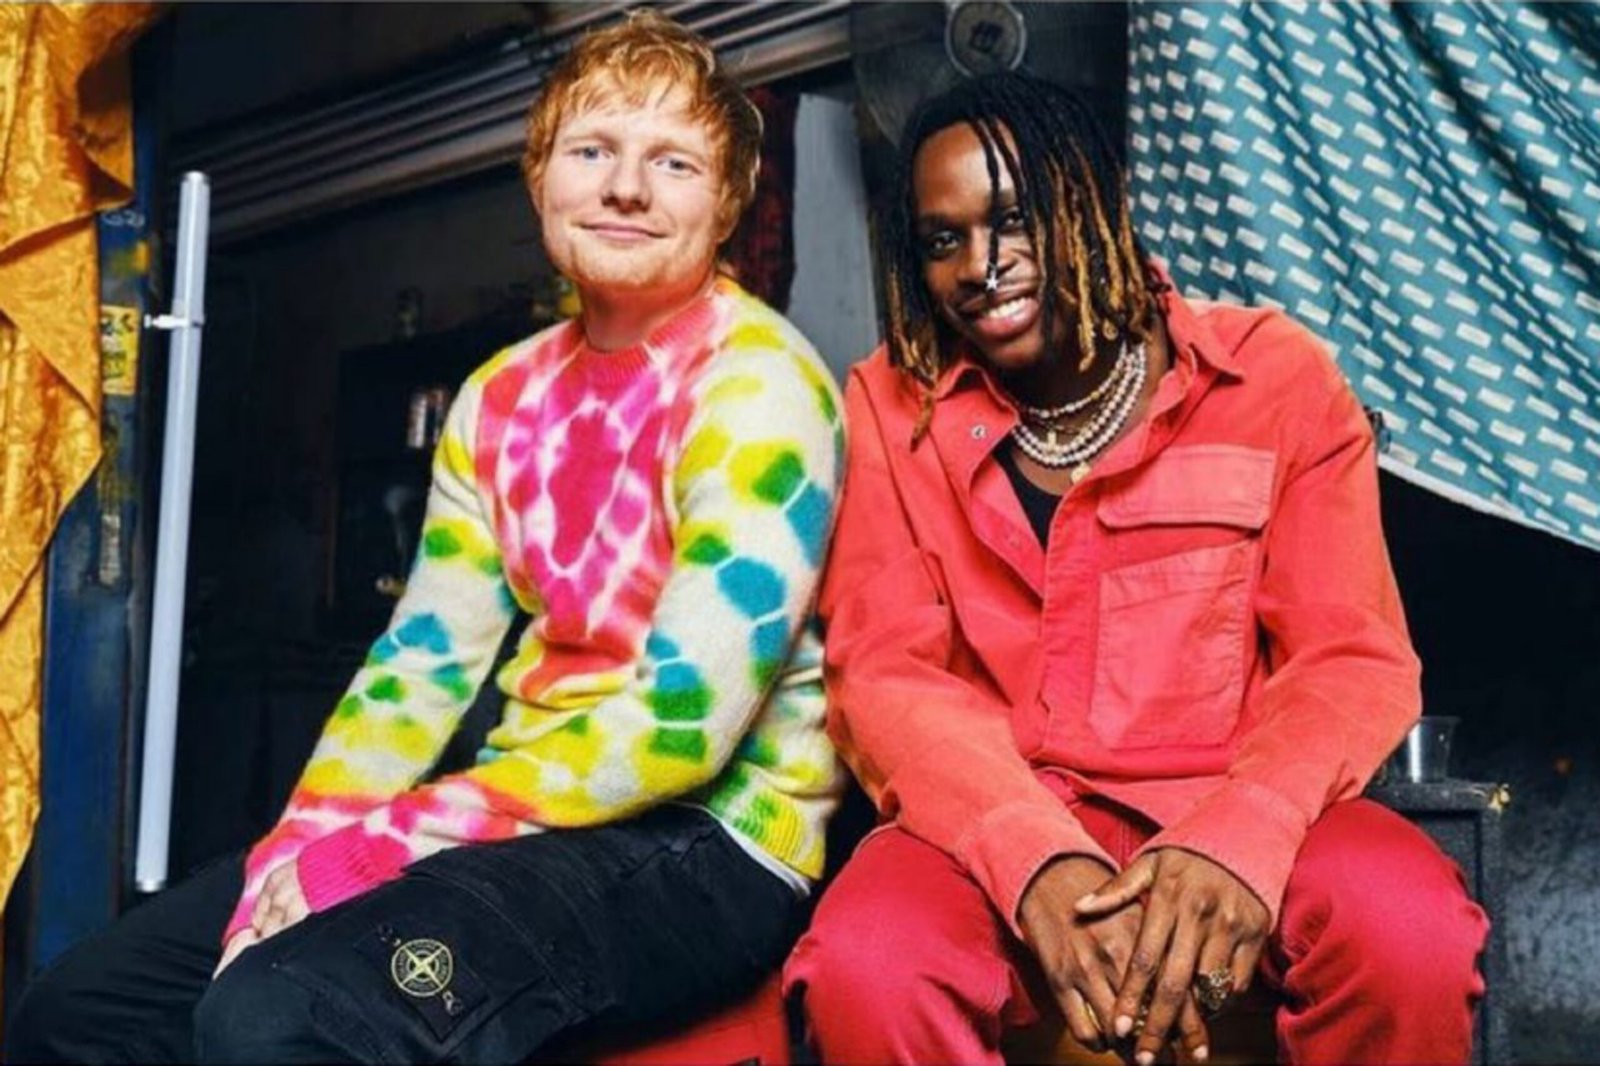 Fireboy DML debuts on UK Top 10 Chart with the help of "Peru" song featuring ED Sheeran